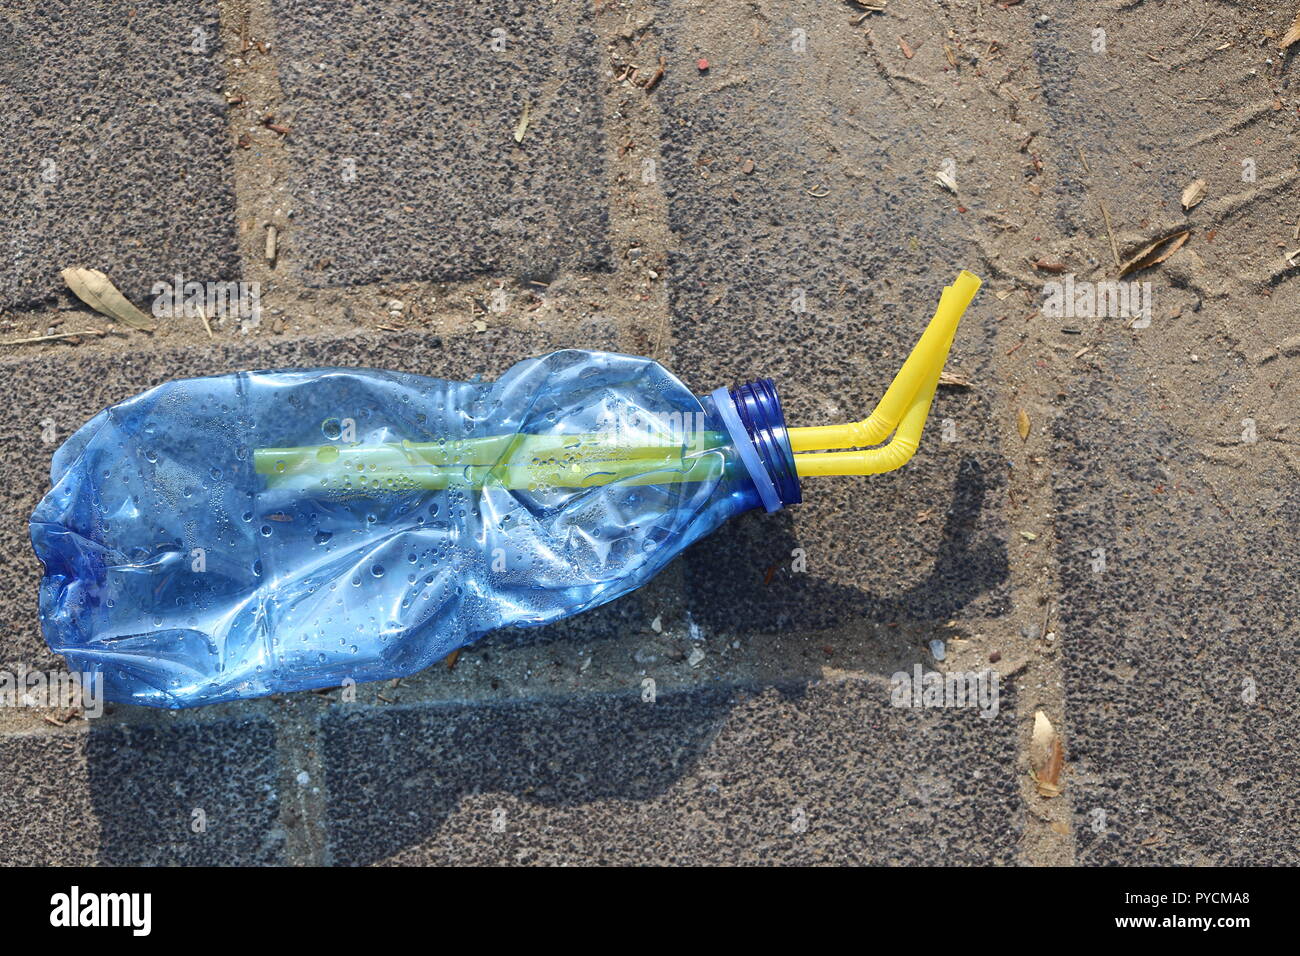 Crushed Plastic Bottle on the Sidewalk. Blue squeezed plastic bottle with two drinking straws inside, on the pavement. Disposable bottle thrown away Stock Photo